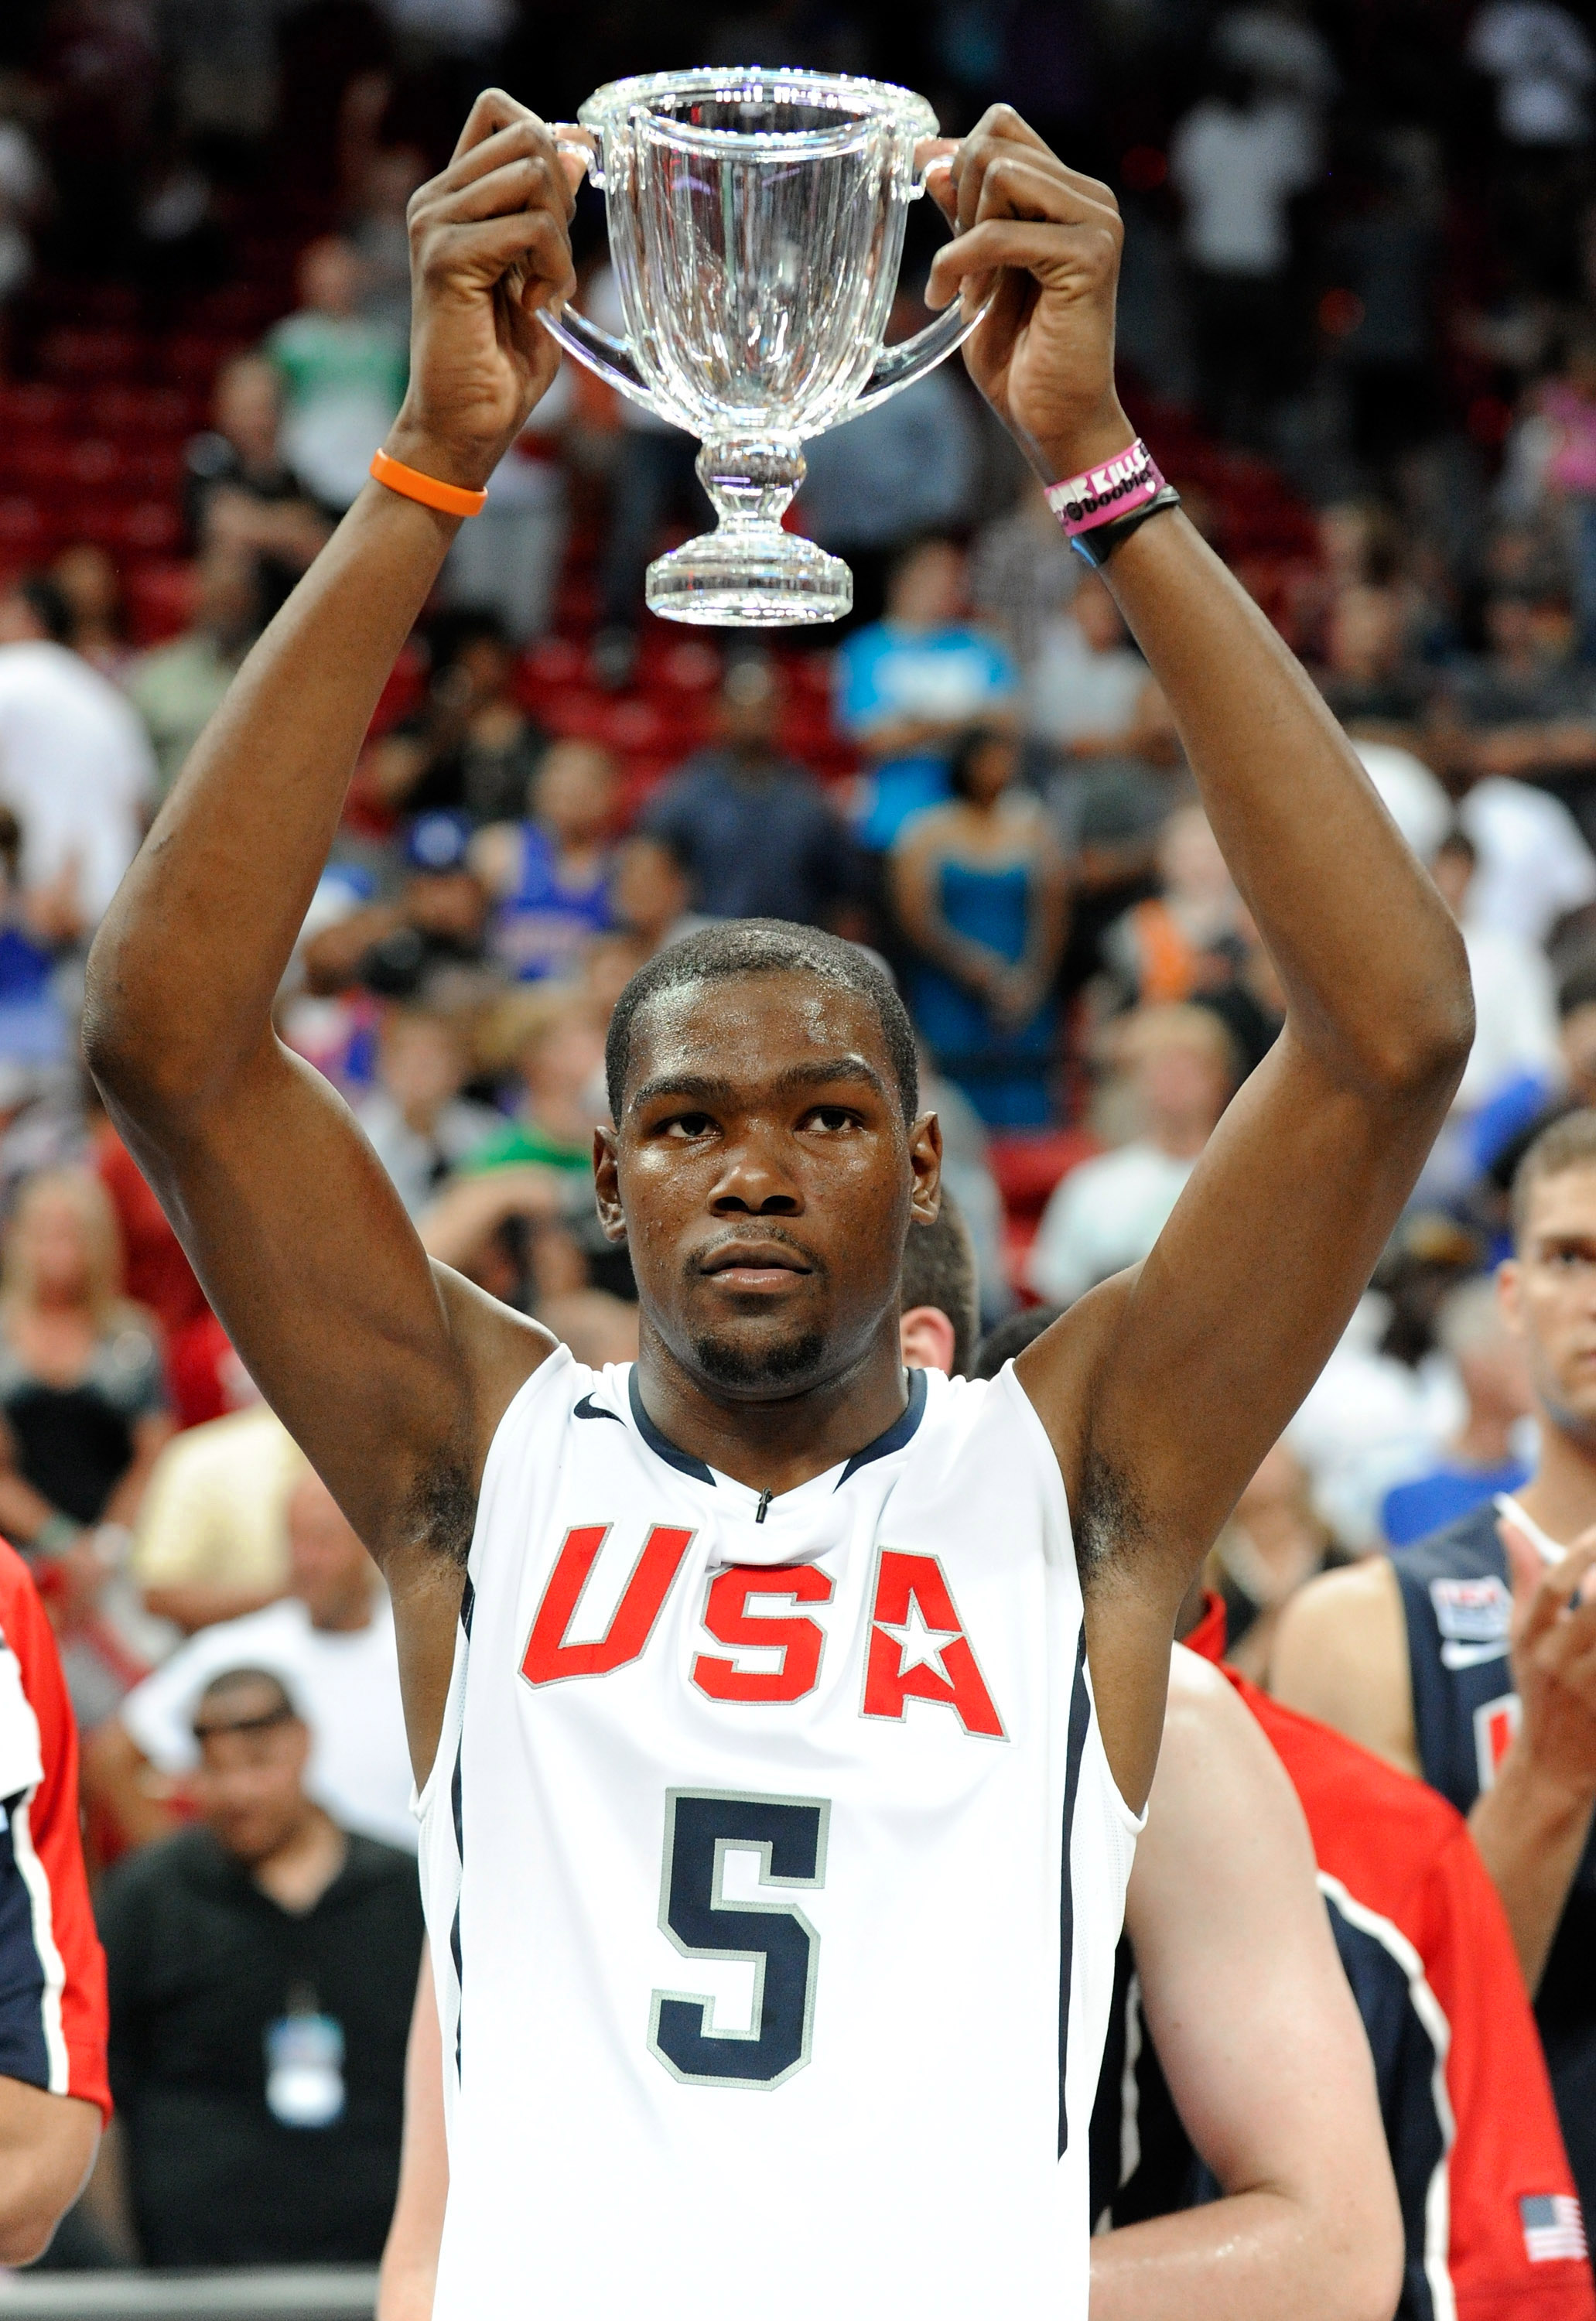 LAS VEGAS - JULY 24:  Kevin Durant #5 of the 2010 USA Basketball Men's National Team holds up a Tiffany & Co. player-of-the-game cup after a USA Basketball showcase at the Thomas & Mack Center on July 24, 2010 in Las Vegas, Nevada.  (Photo by Ethan Miller